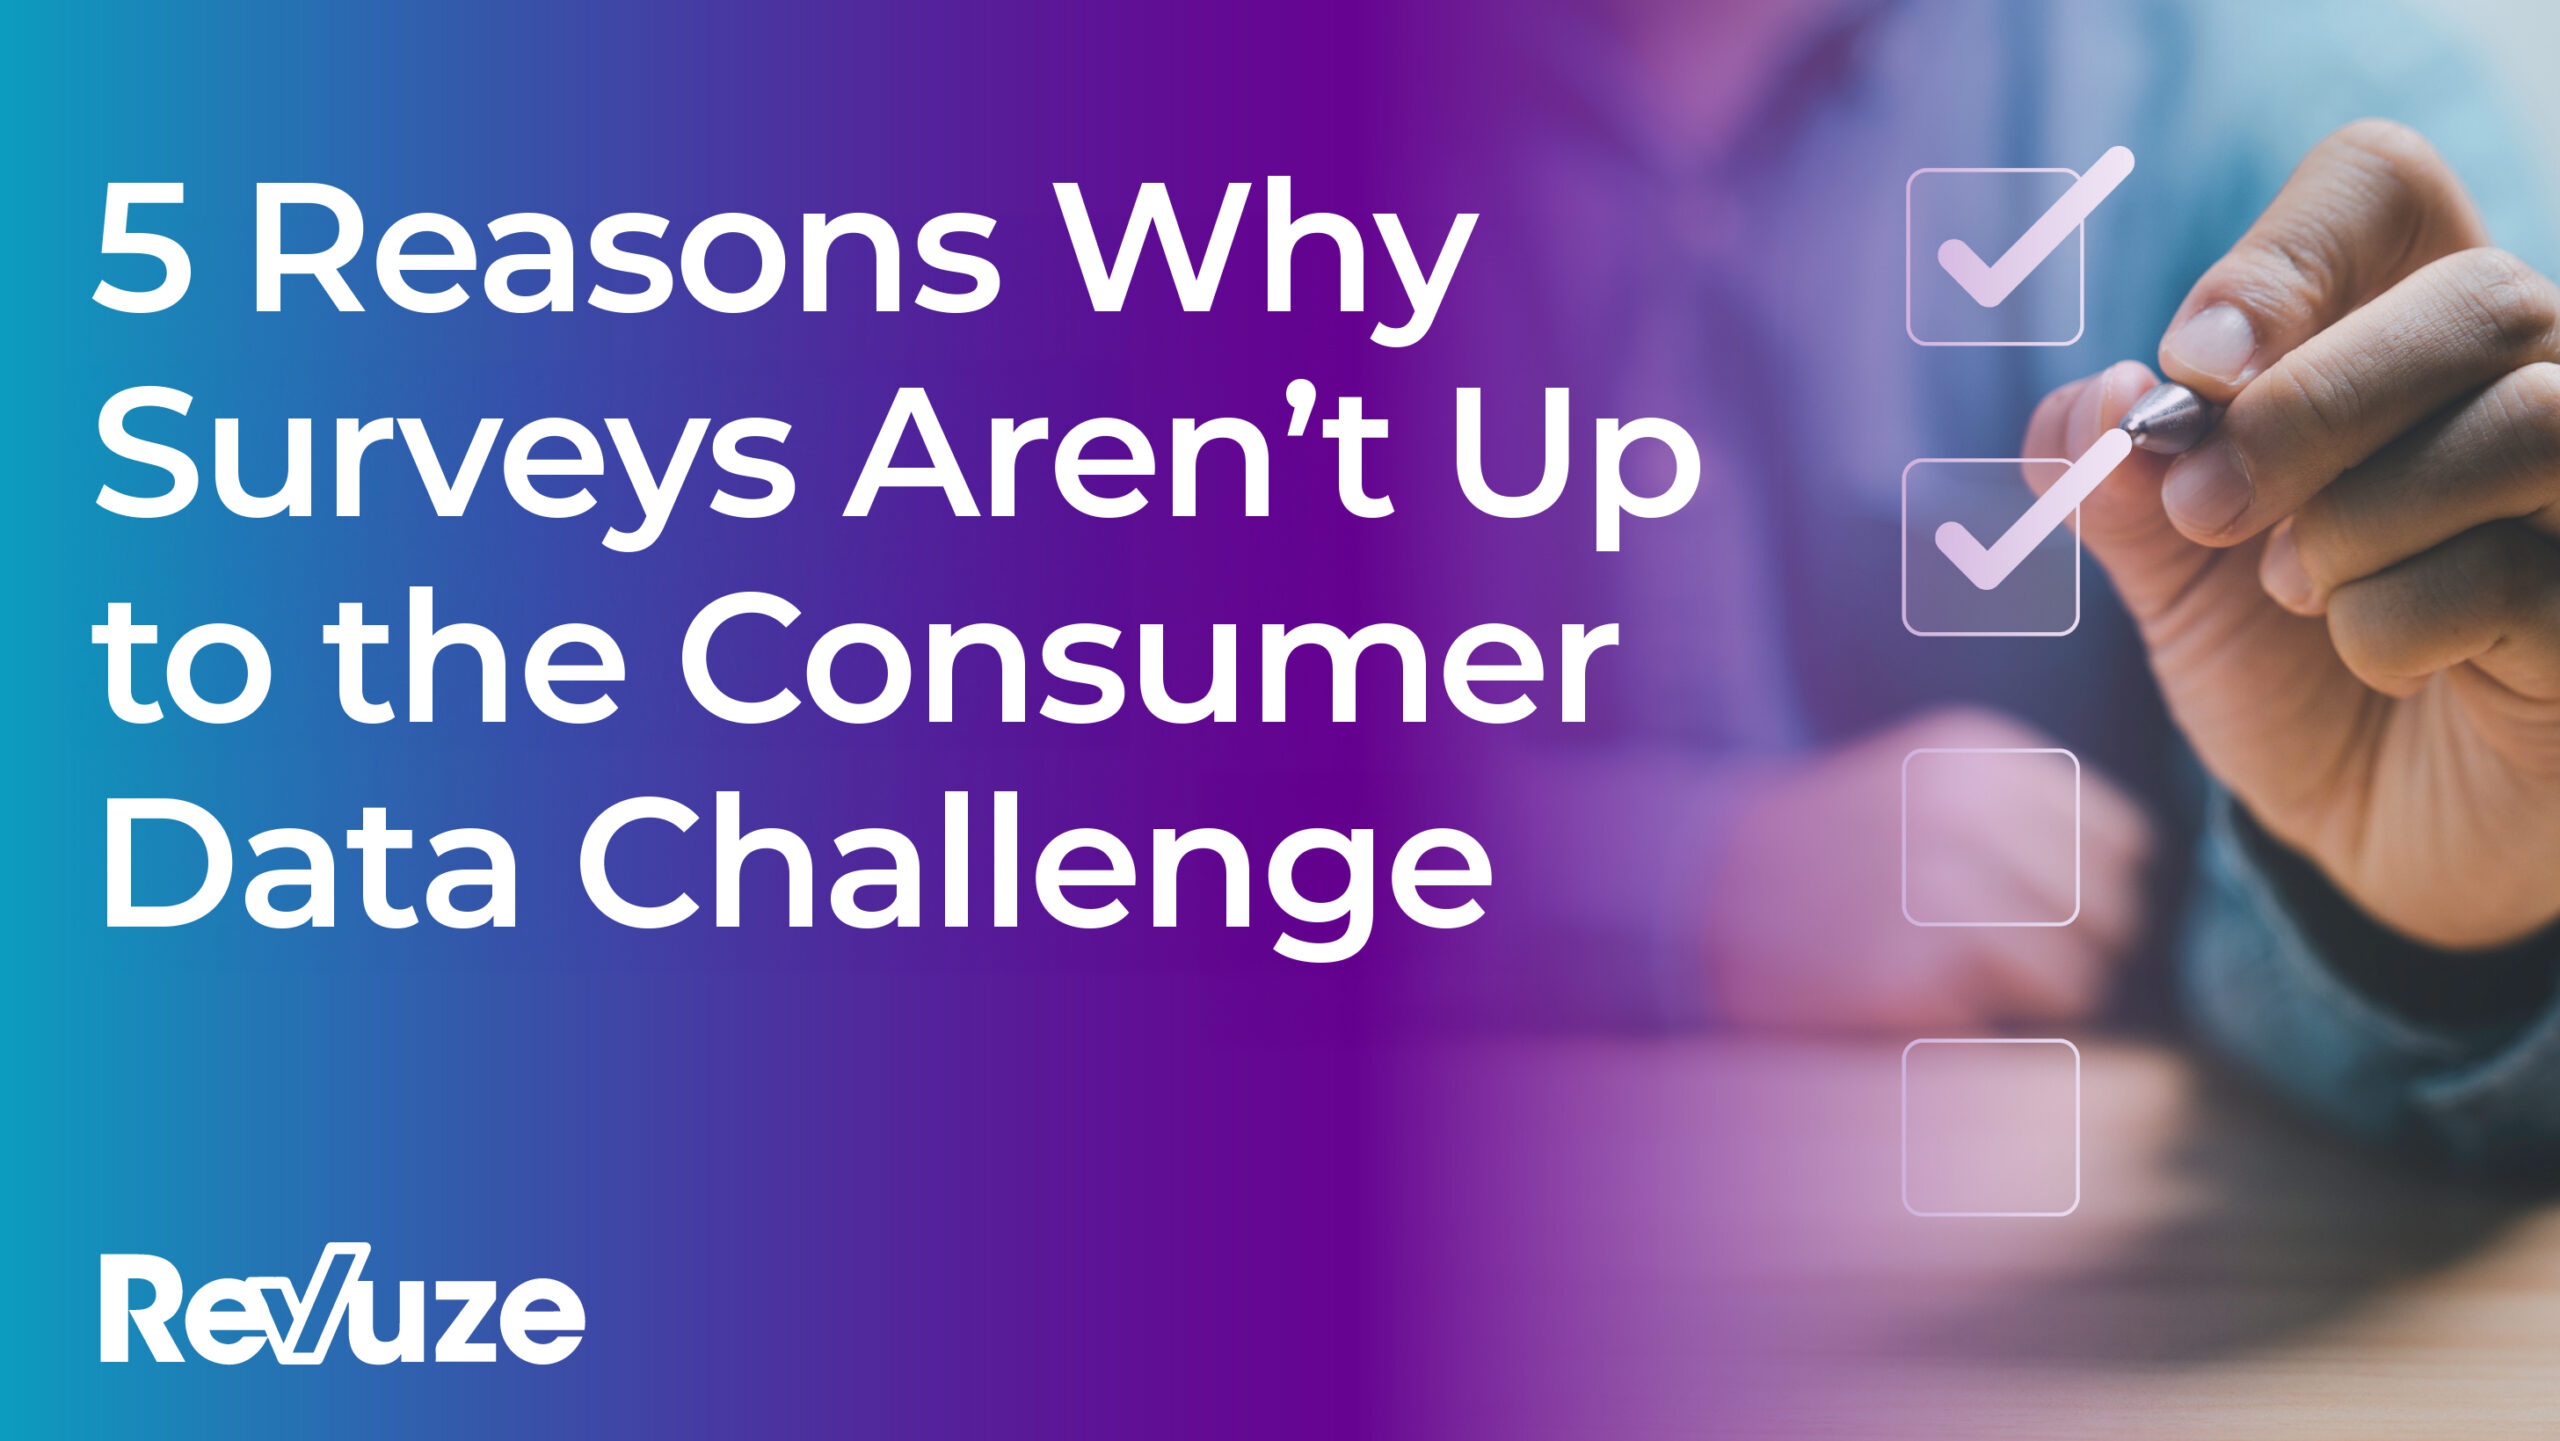 5 Reasons Why Surveys Aren’t Up to the Consumer Data Challenge